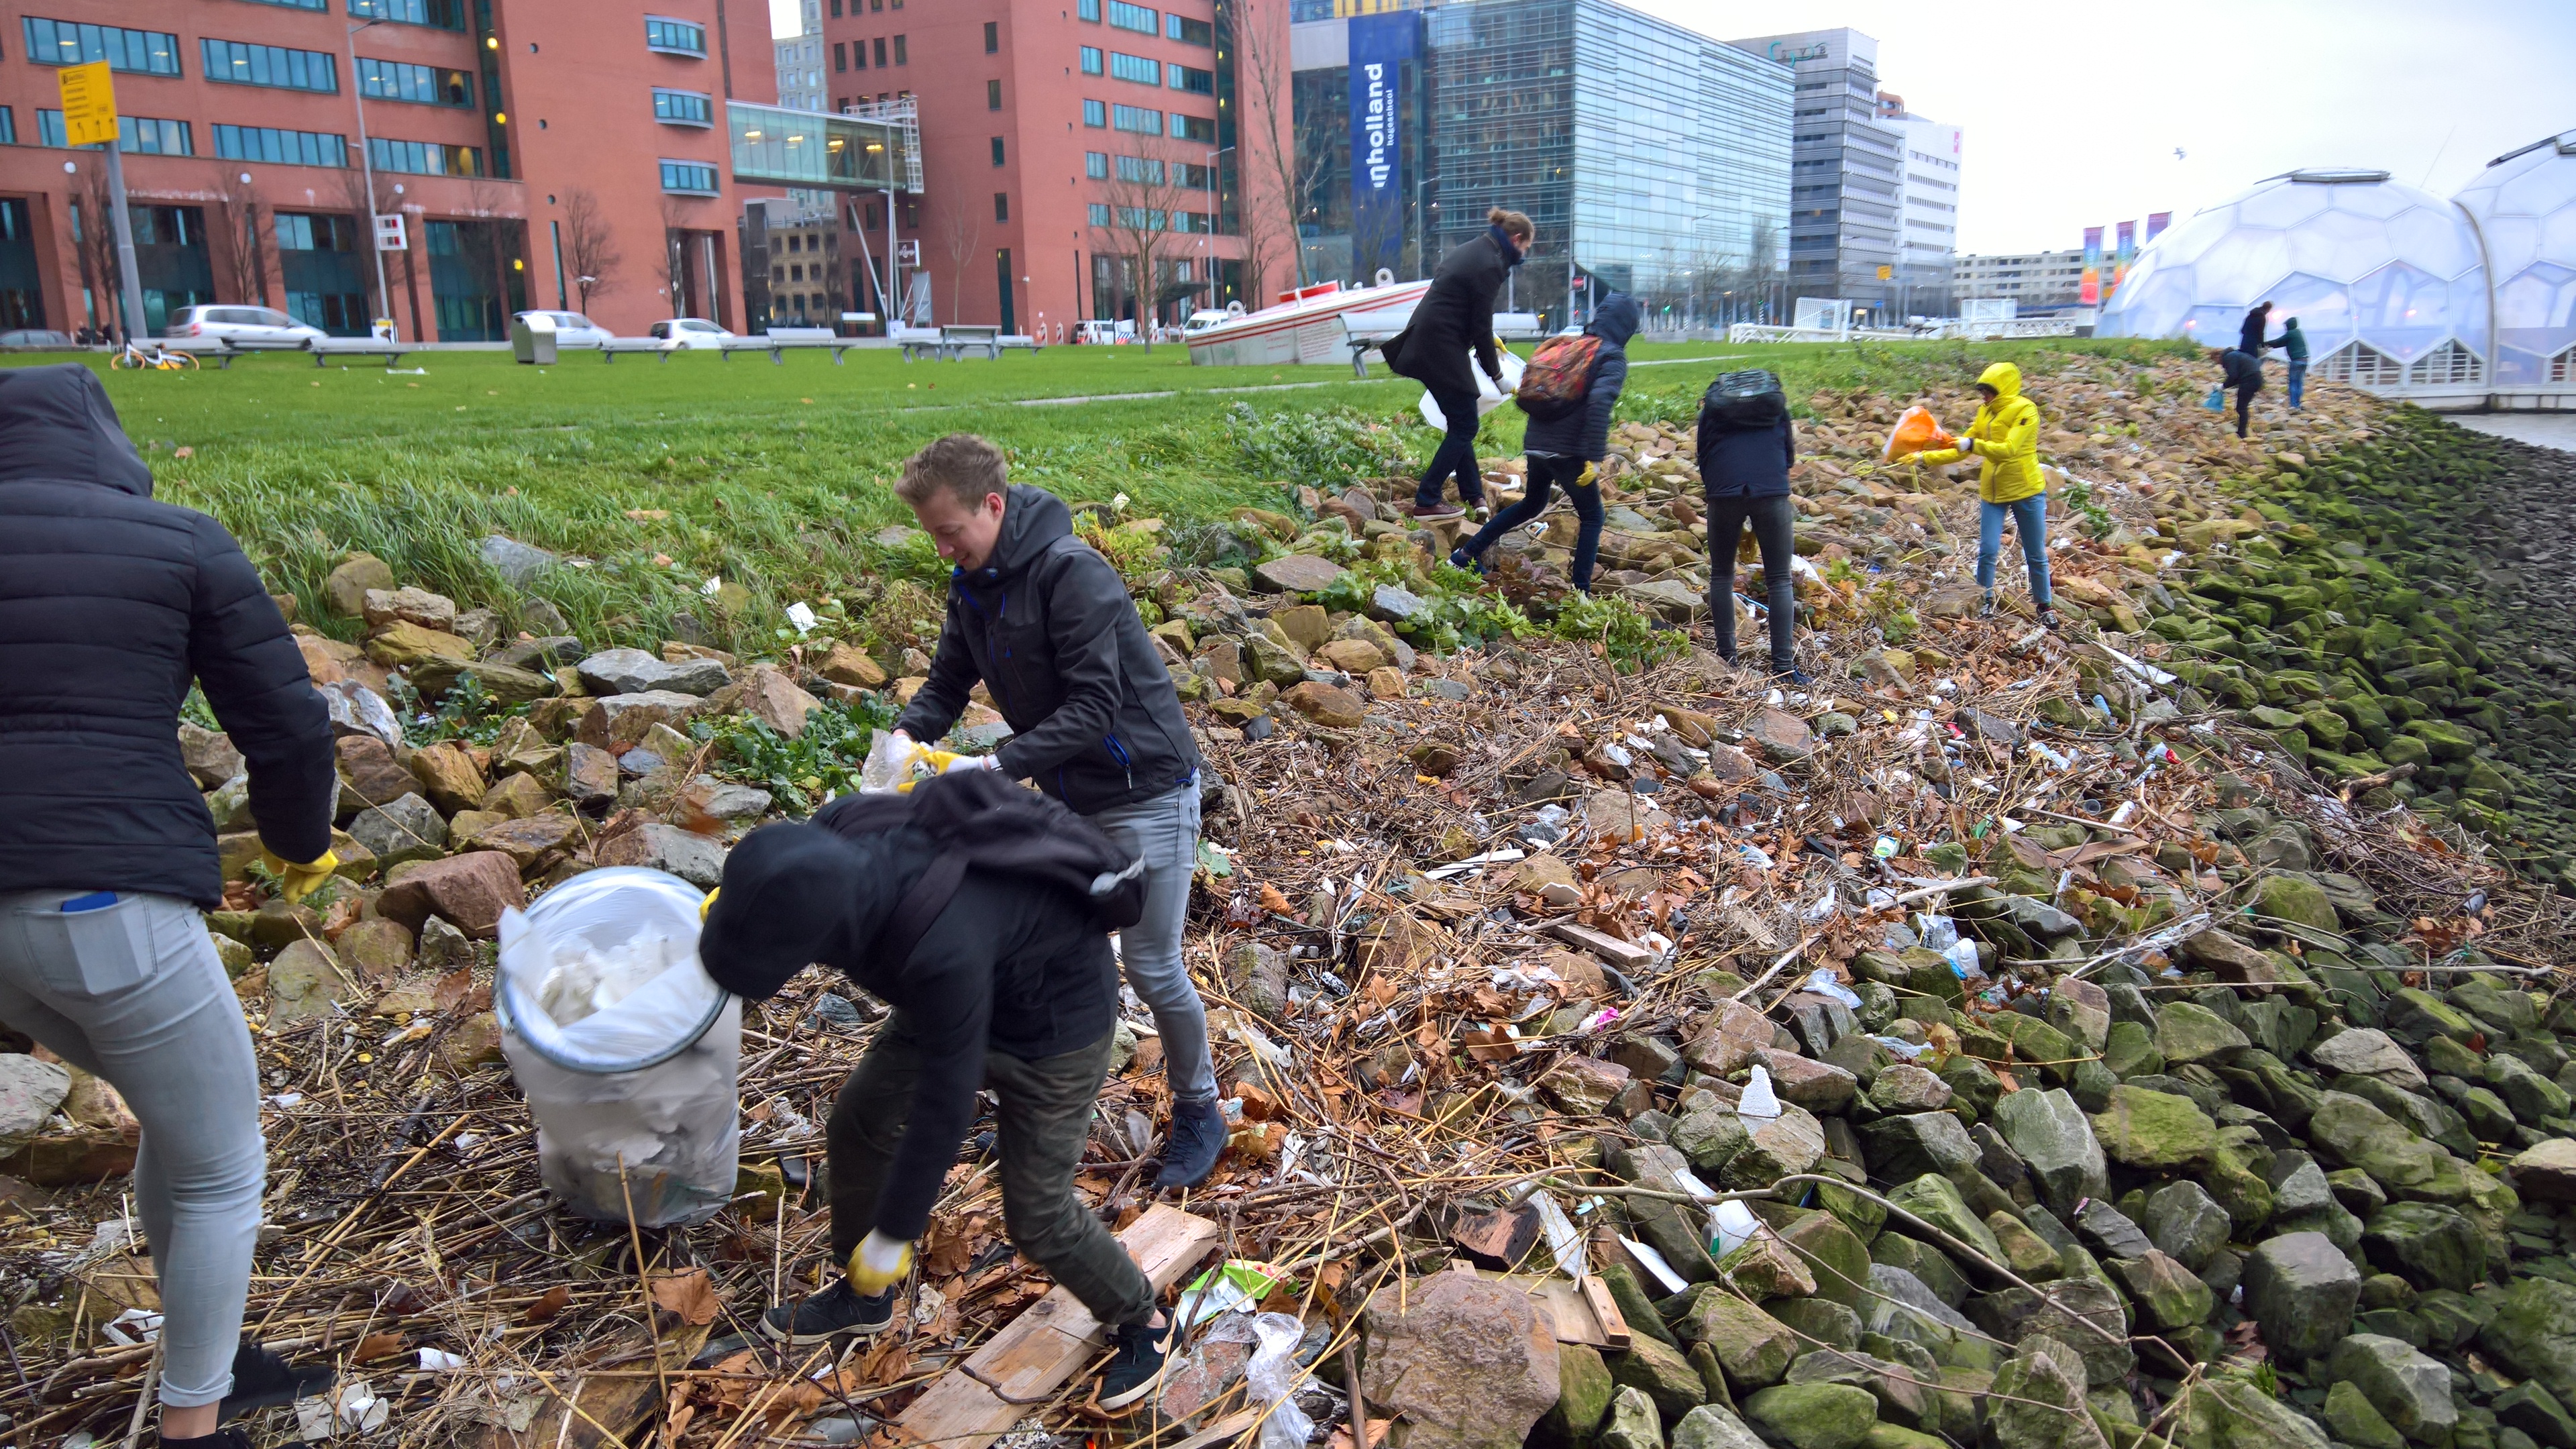 Volunteers collecting plastic waste materials from a river bank